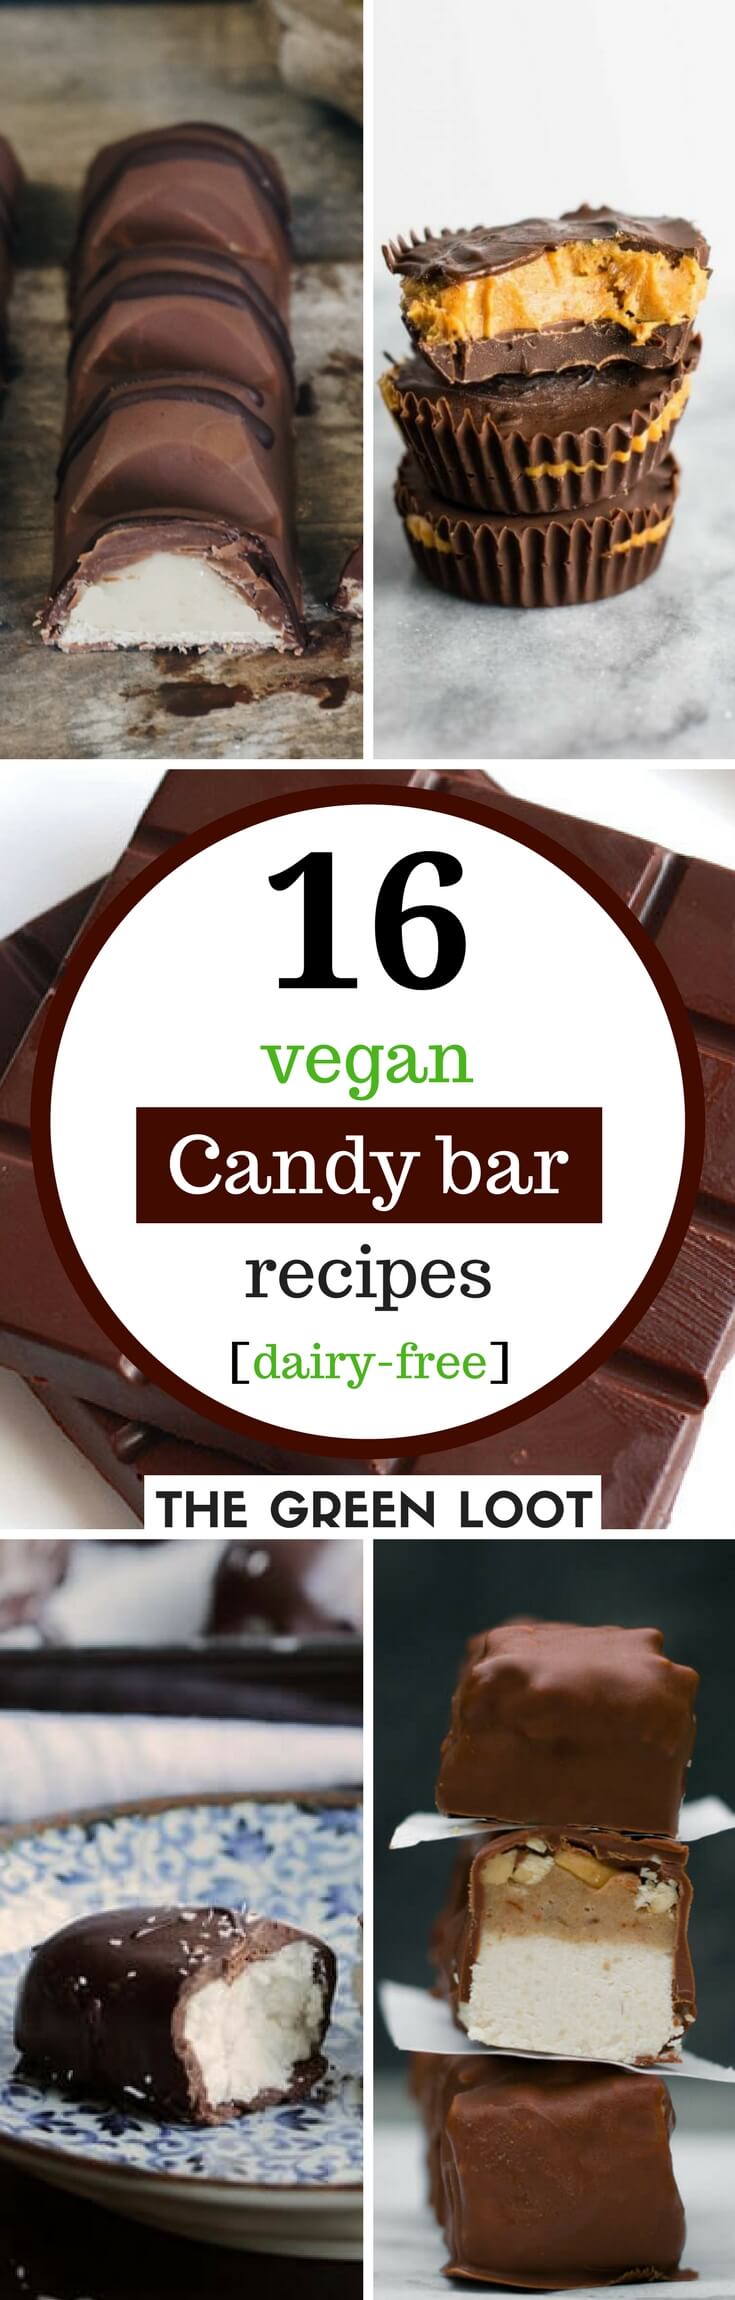 Vegan Chocolate Bar Recipes that are dairy-free and homemade so you can enjoy your favorite candy bars in a healthier form. These DIY vegan recipes for Twix, Almond Joy, Snickers...etc. taste like the real deal. Except, these sweet treats aren't full of unhealthy dairy, eggs and artificial ingredients. | The Green Loot #vegan #candybar